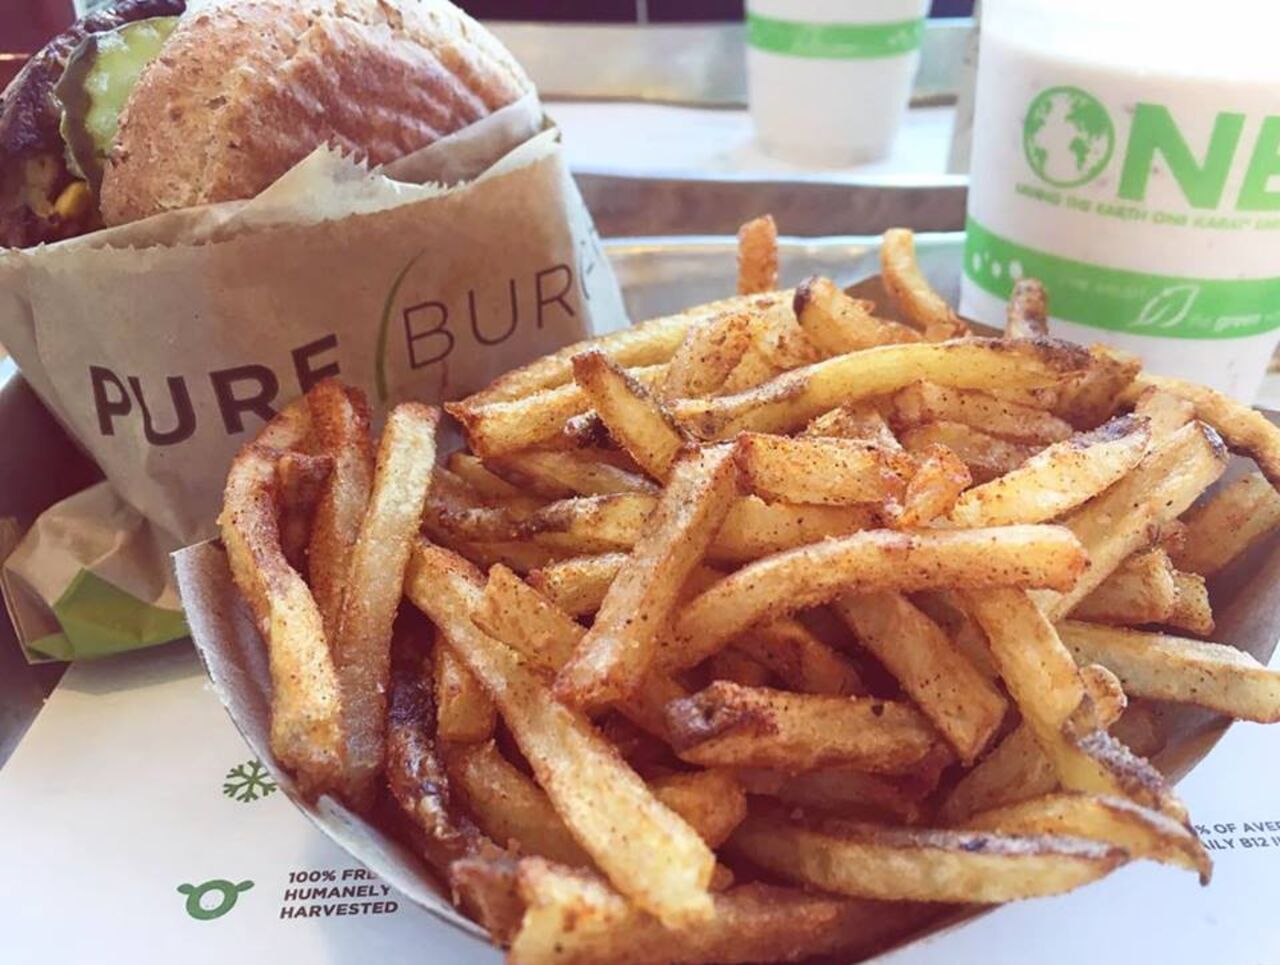 A photo of Pure Burger